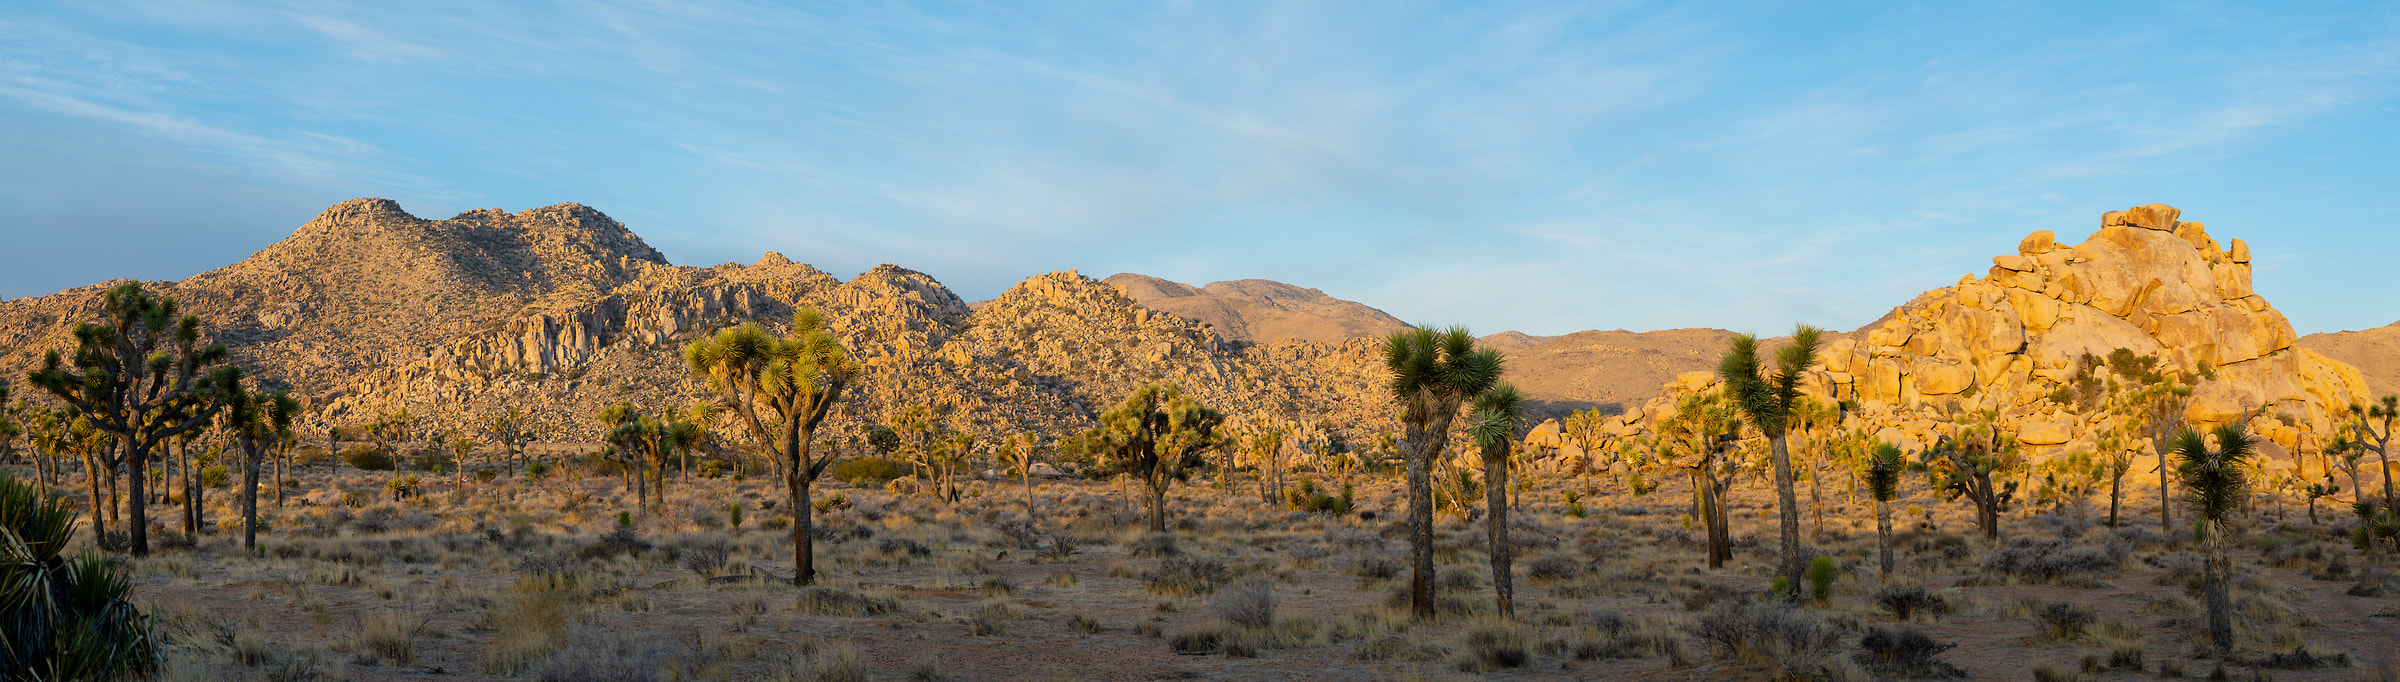 419 megapixels! A very high resolution, large-format VAST photo print of Joshua Tree National Park; landscape photograph created by Greg Probst in California